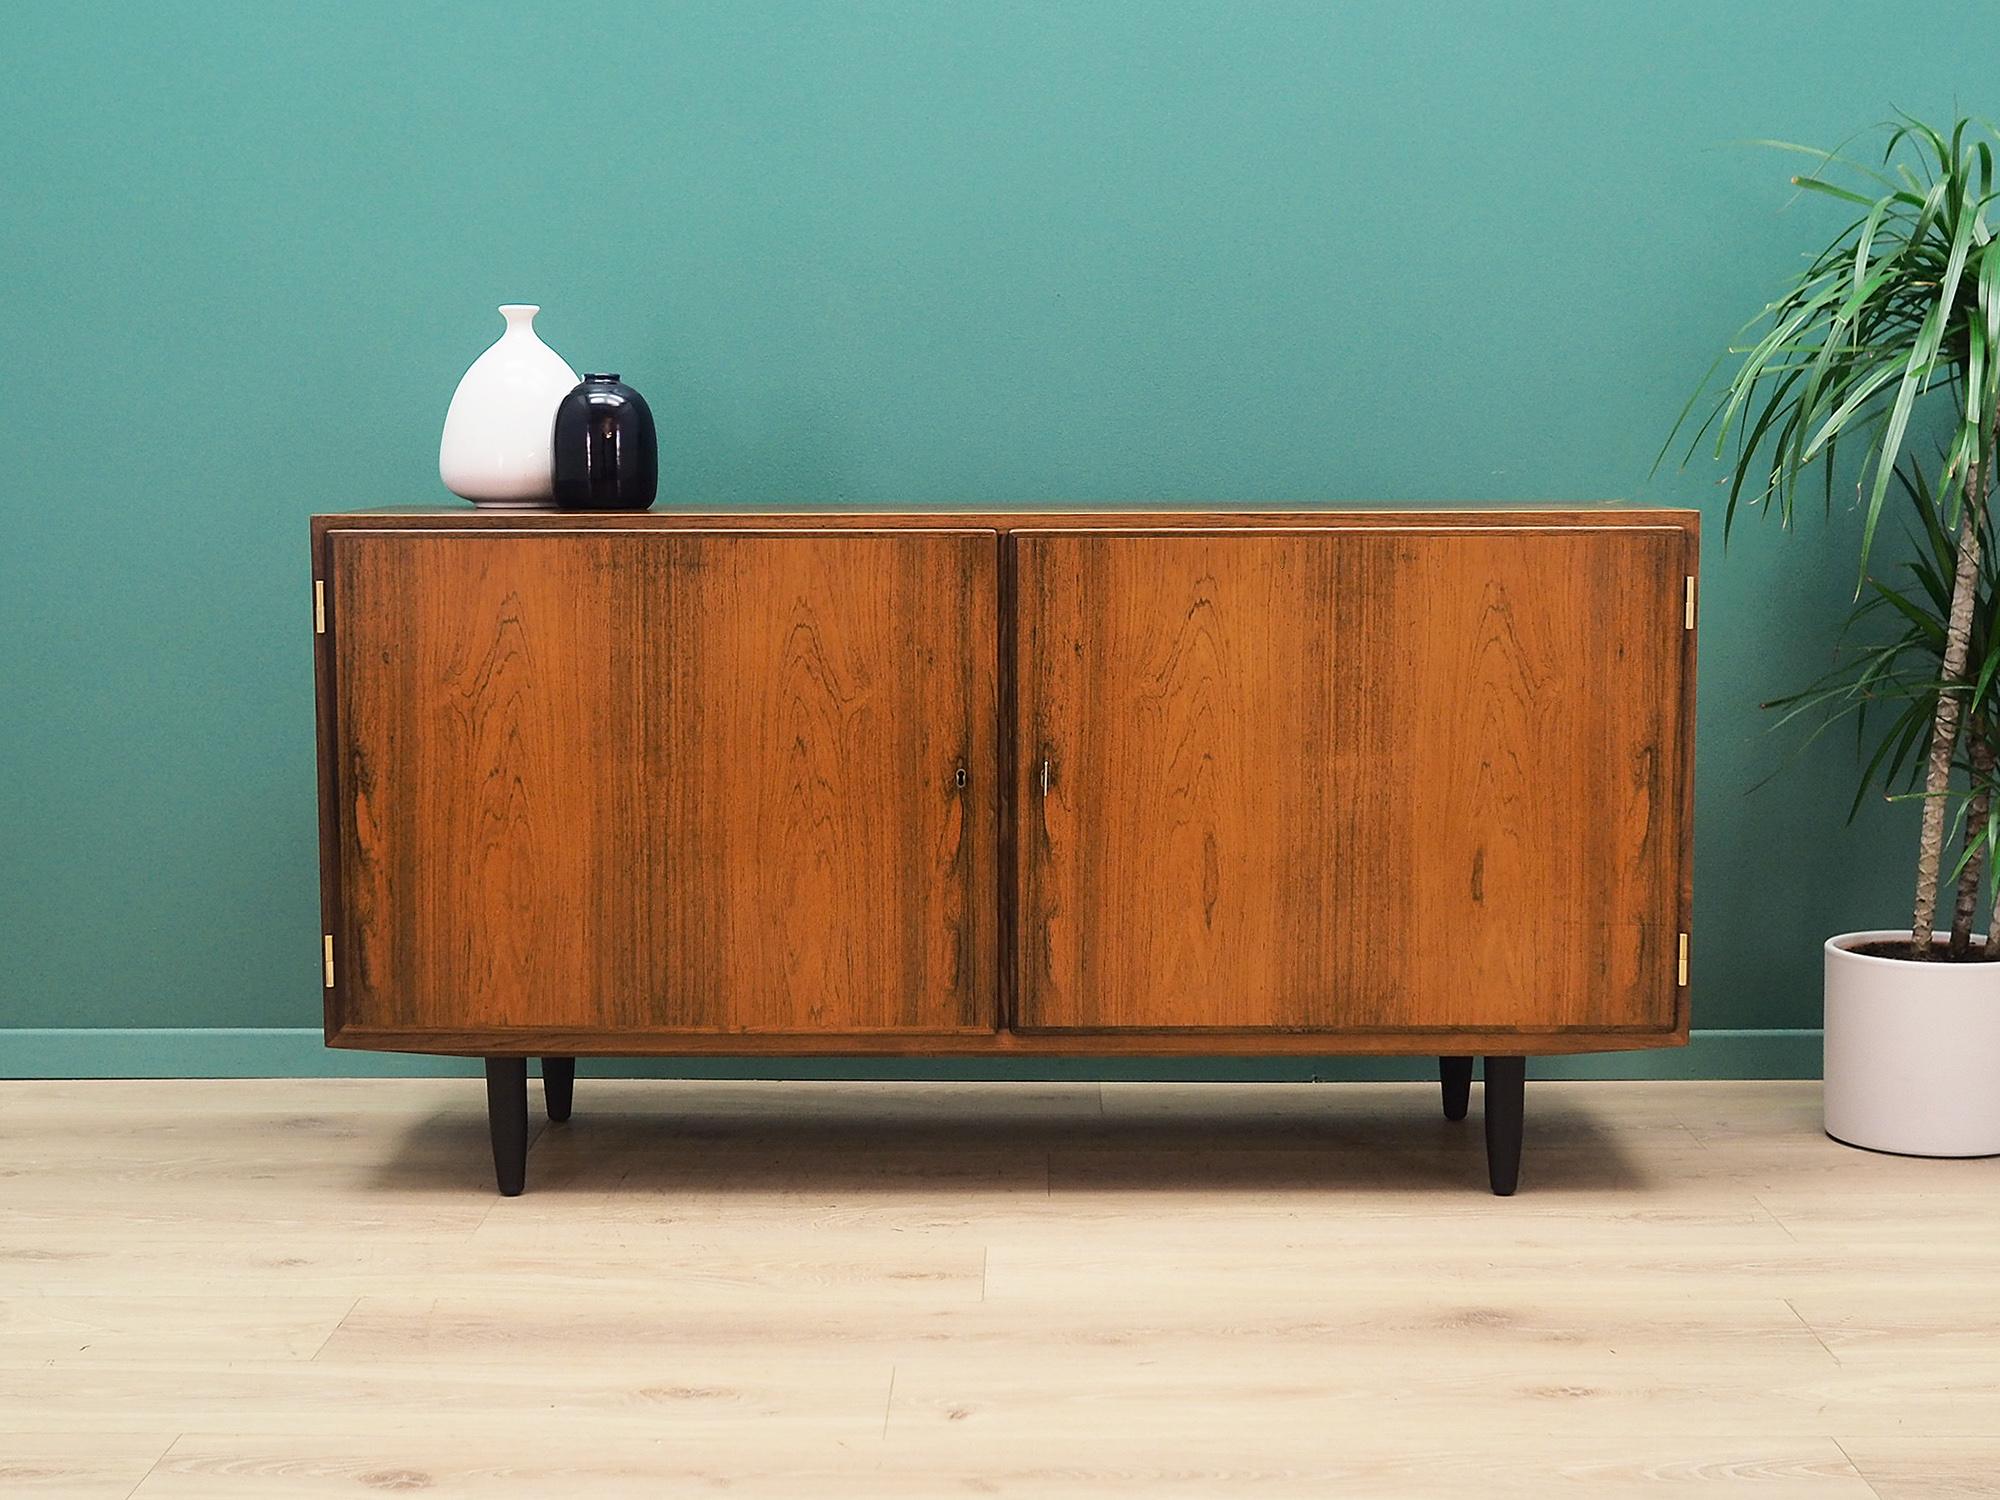 Cabinet was made in the 1960s and was produced by the well-known Danish manufactory Hundevad. It was designed by a leading Danish designer Carlo Jensen.

The structure is covered with rosewood veneer. The legs are made of solid wood stained black.